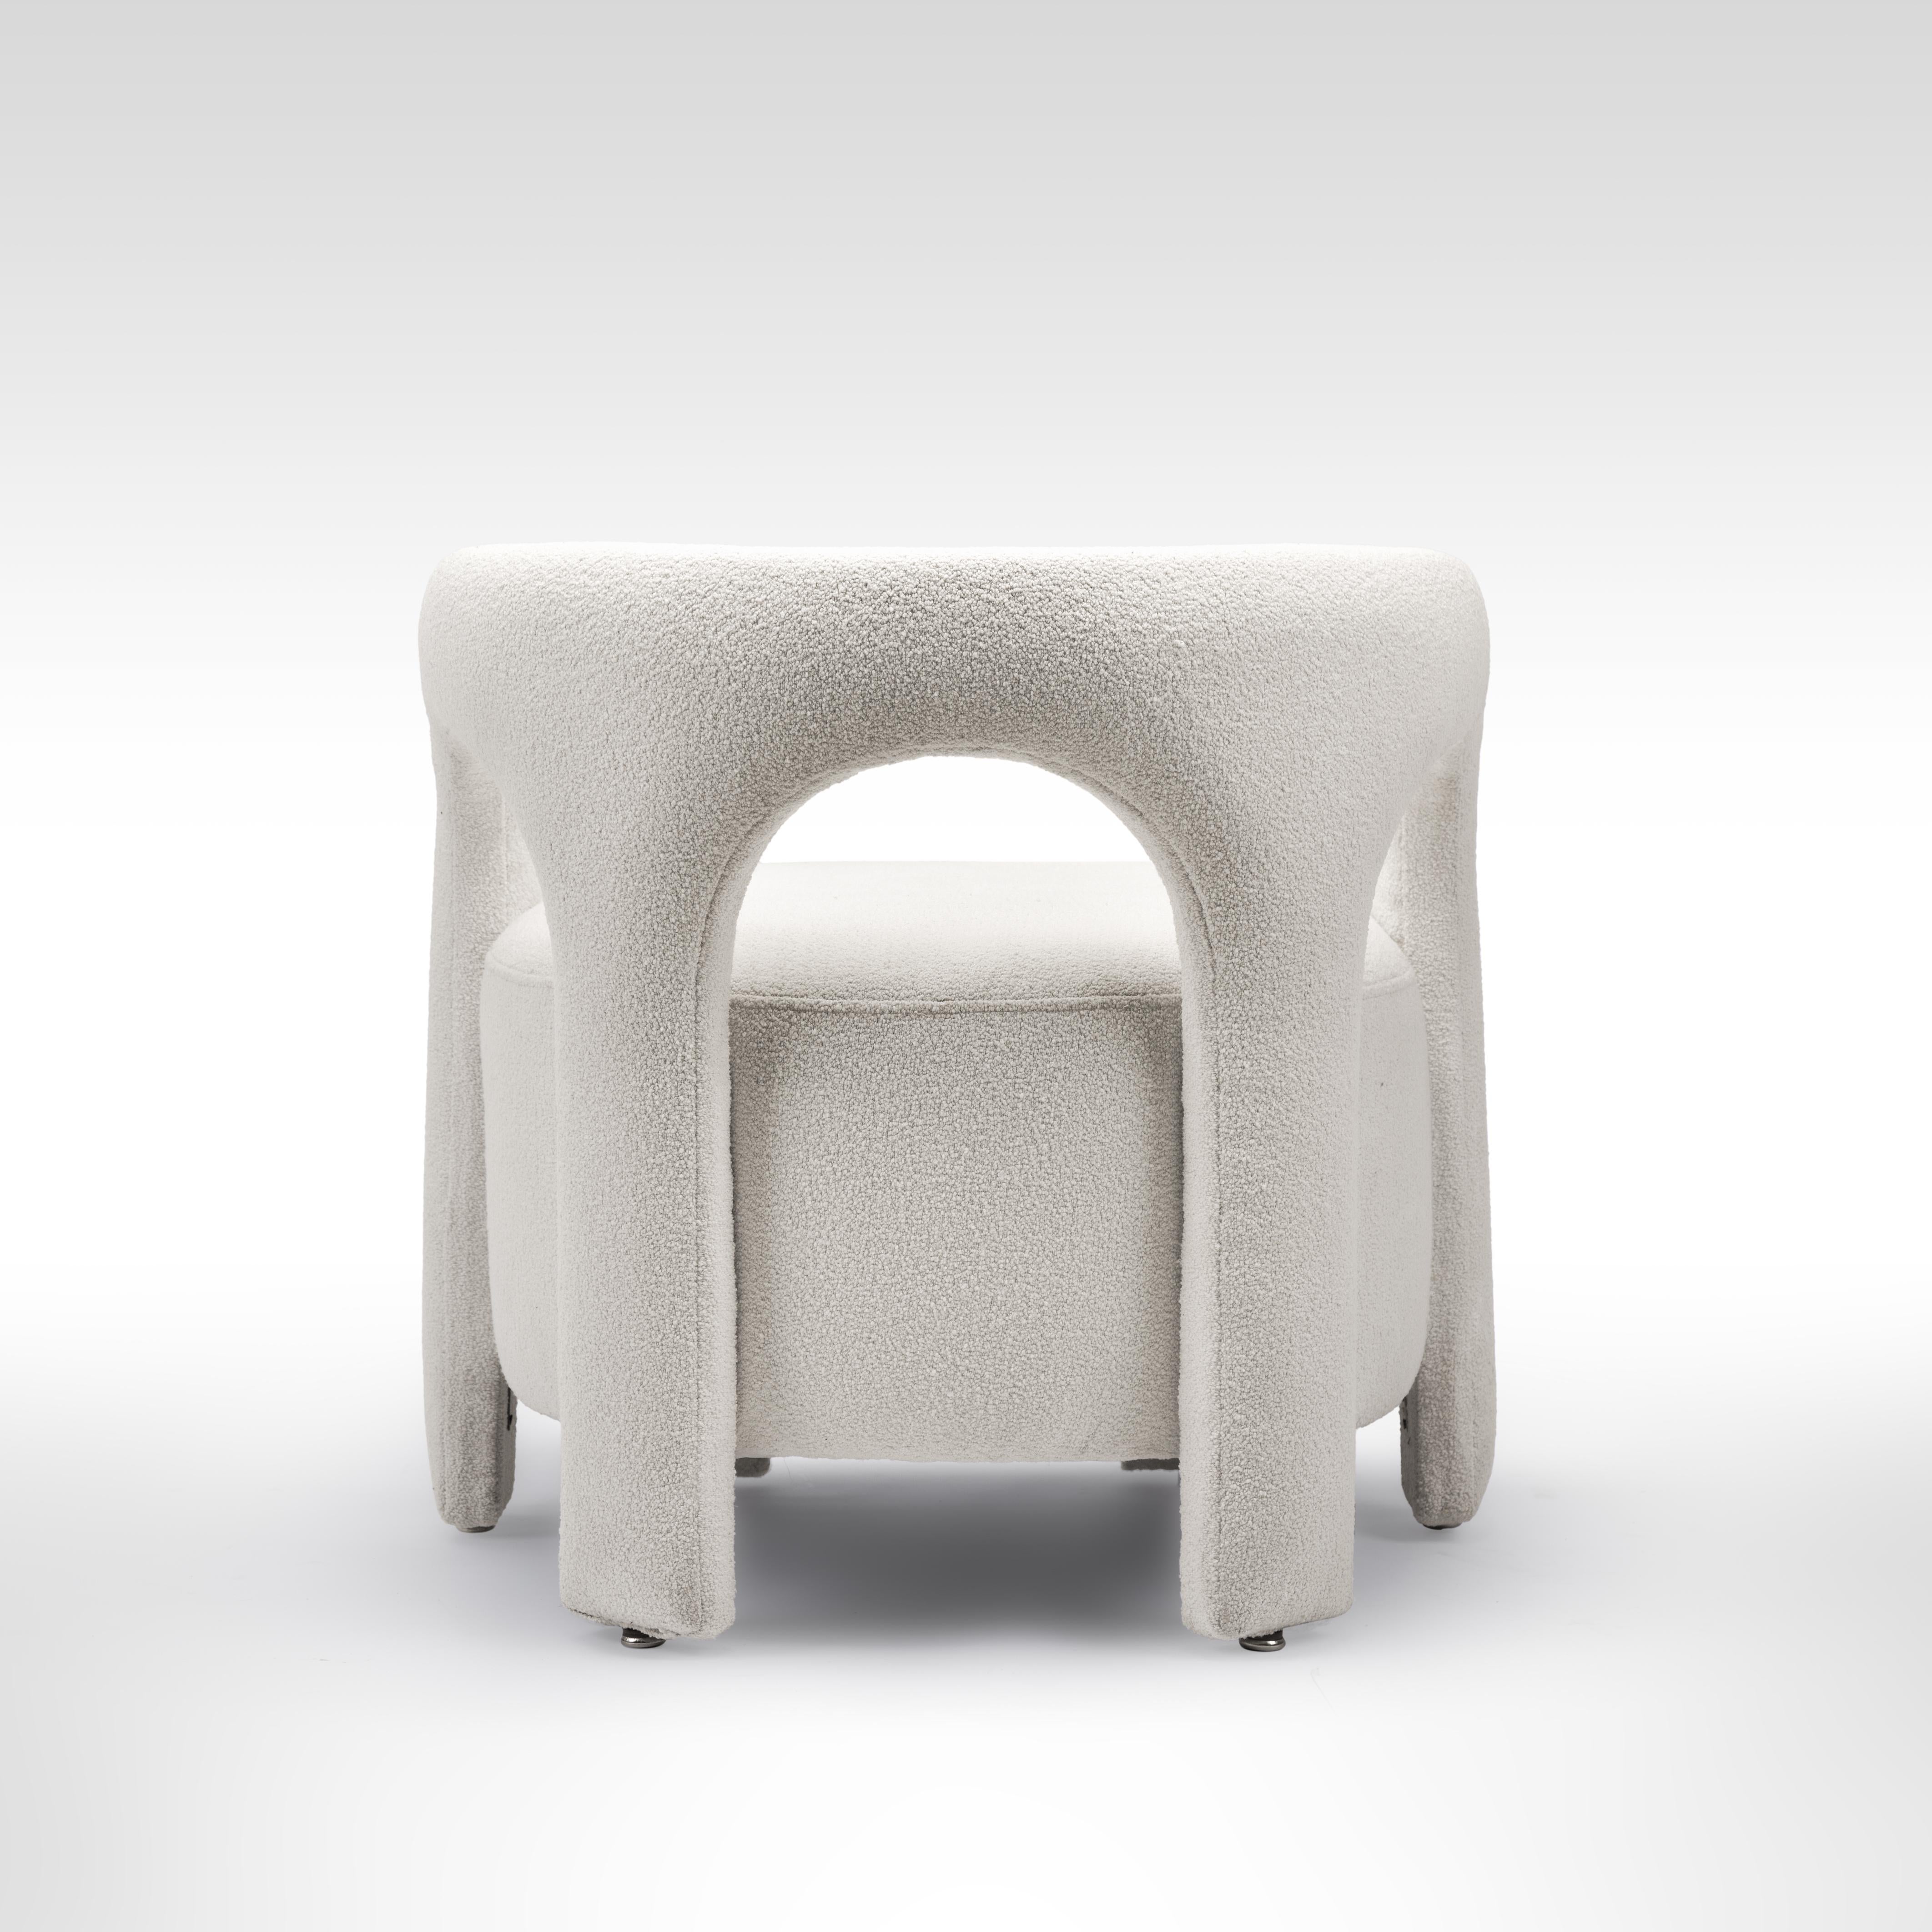 Modern White Curvy Upholstered Armchair Inspired by Egypt's Nubian Architecture For Sale